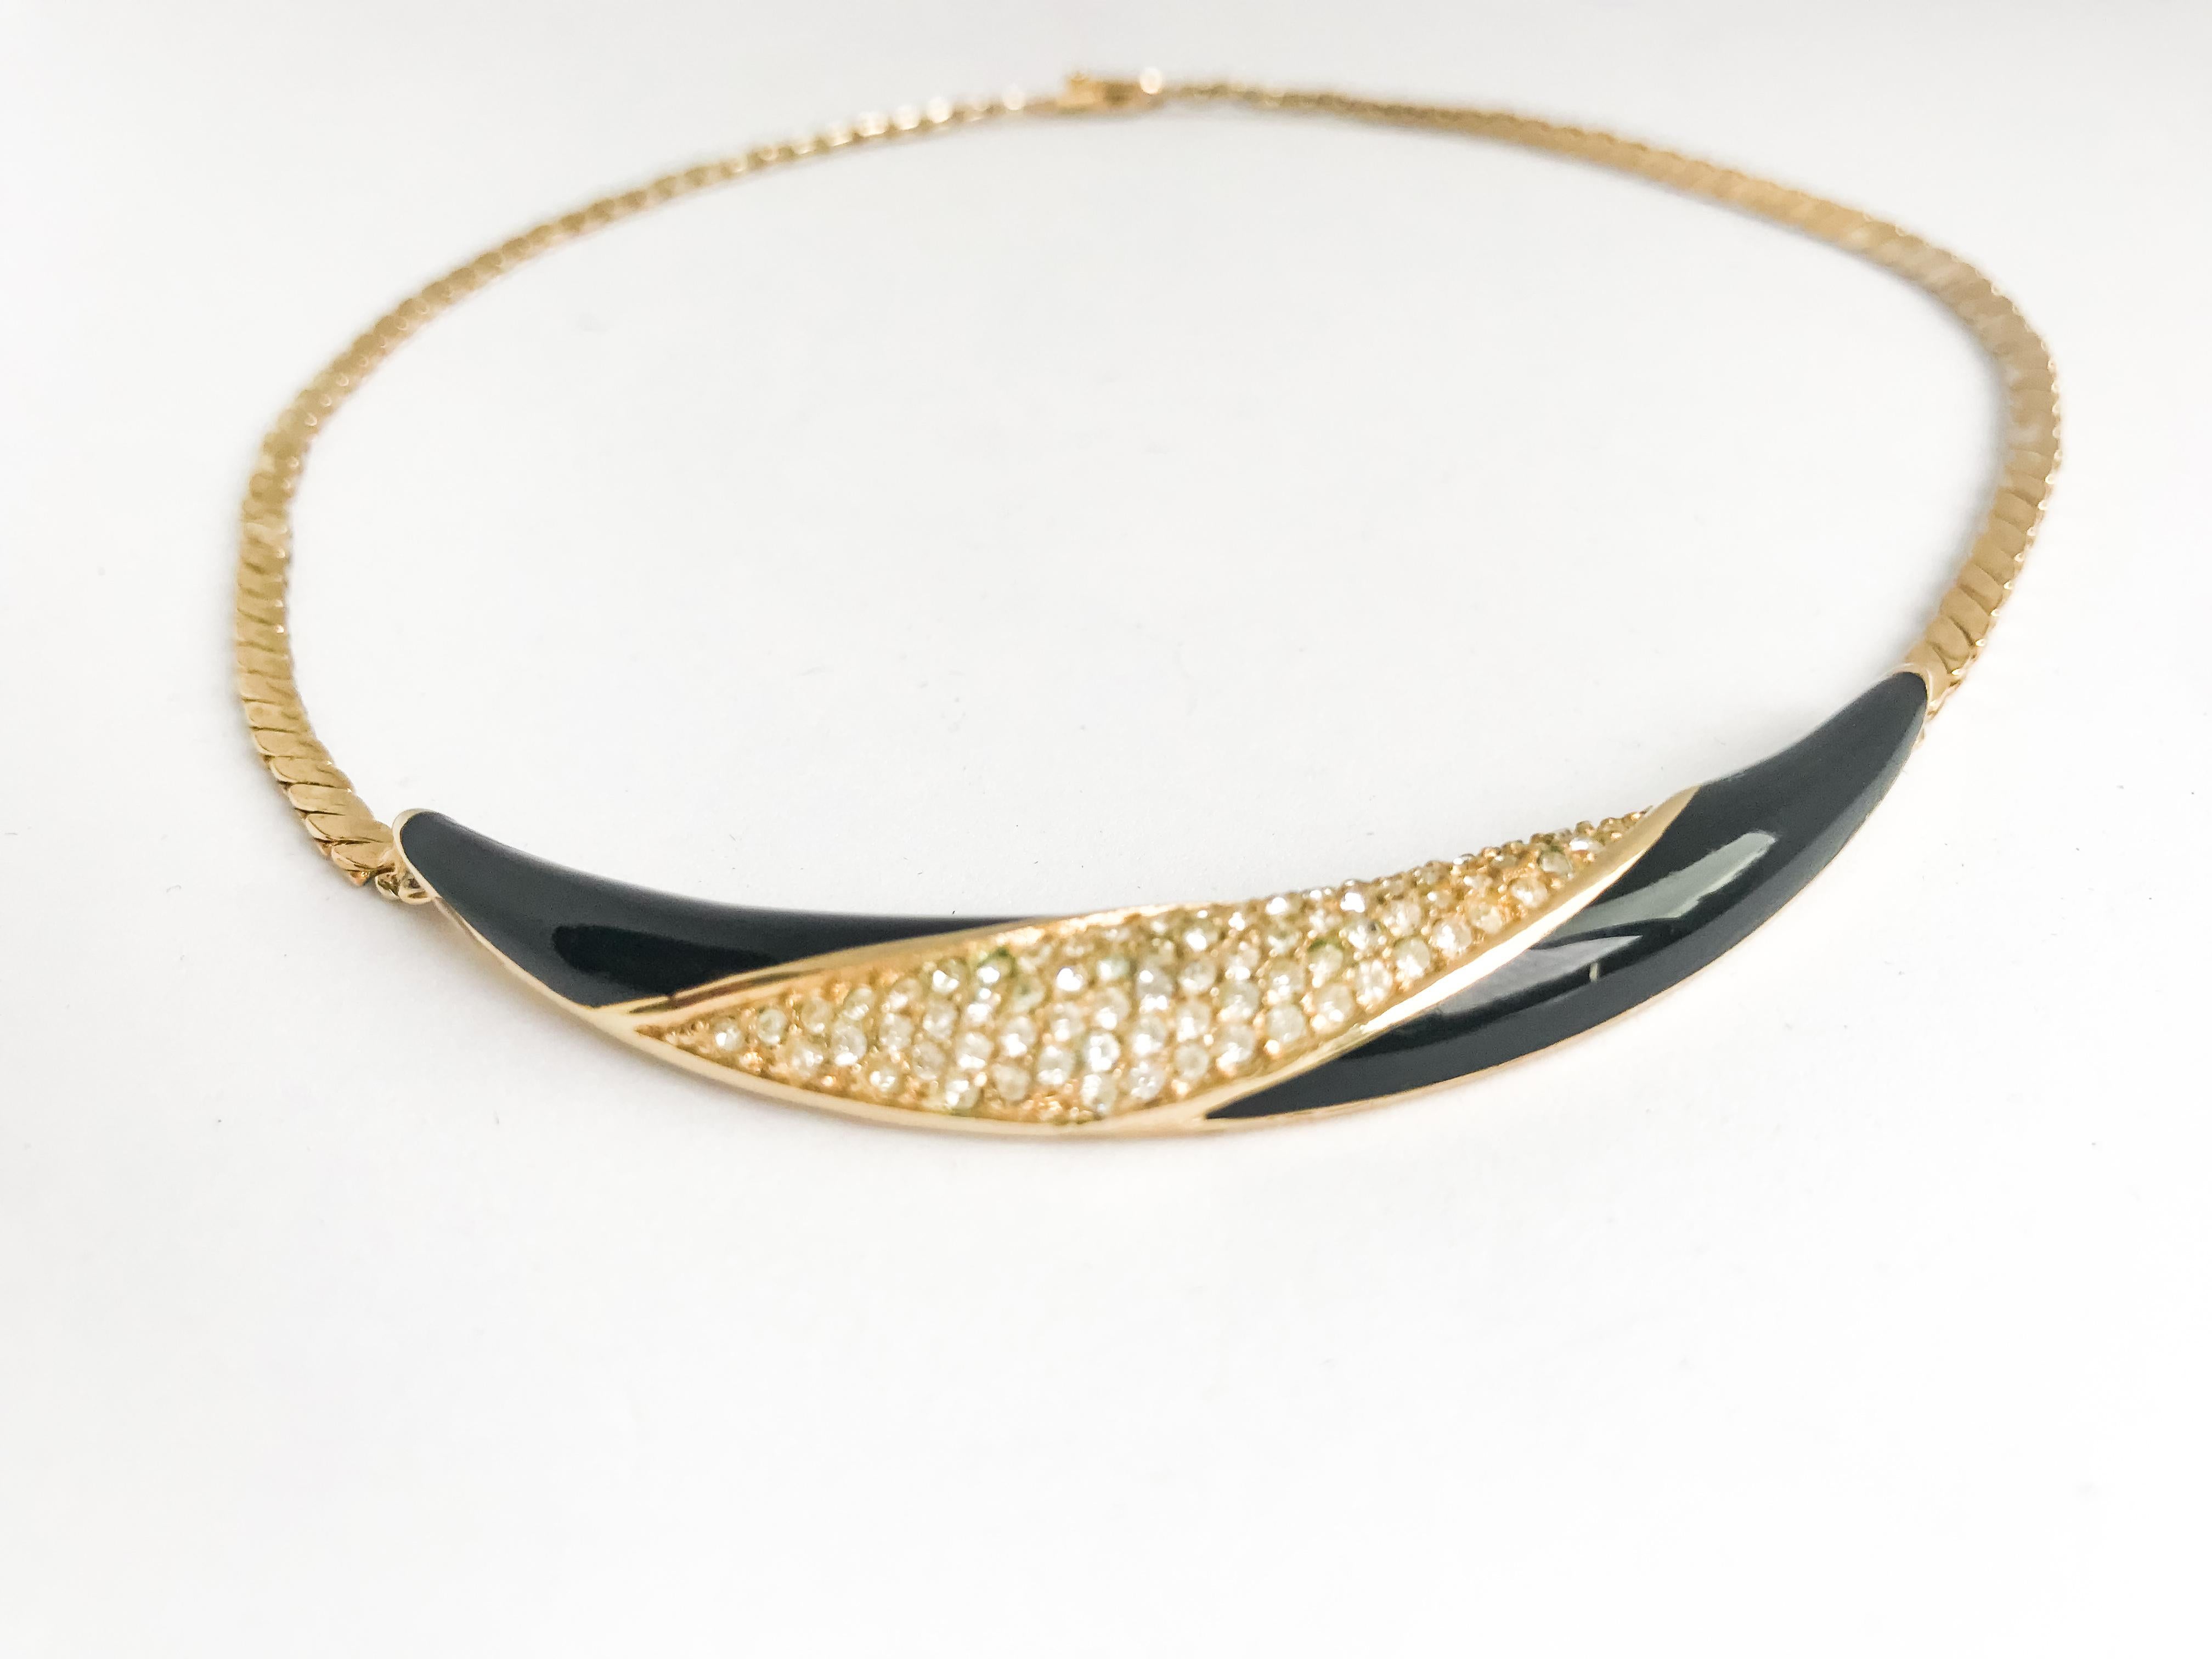 Christian Dior 80s Vintage Black Enamel and Crystal choker necklace.

Necklace  - 15 inch
Pendant -  3 inches x 1/2 inch

Excellent condition
